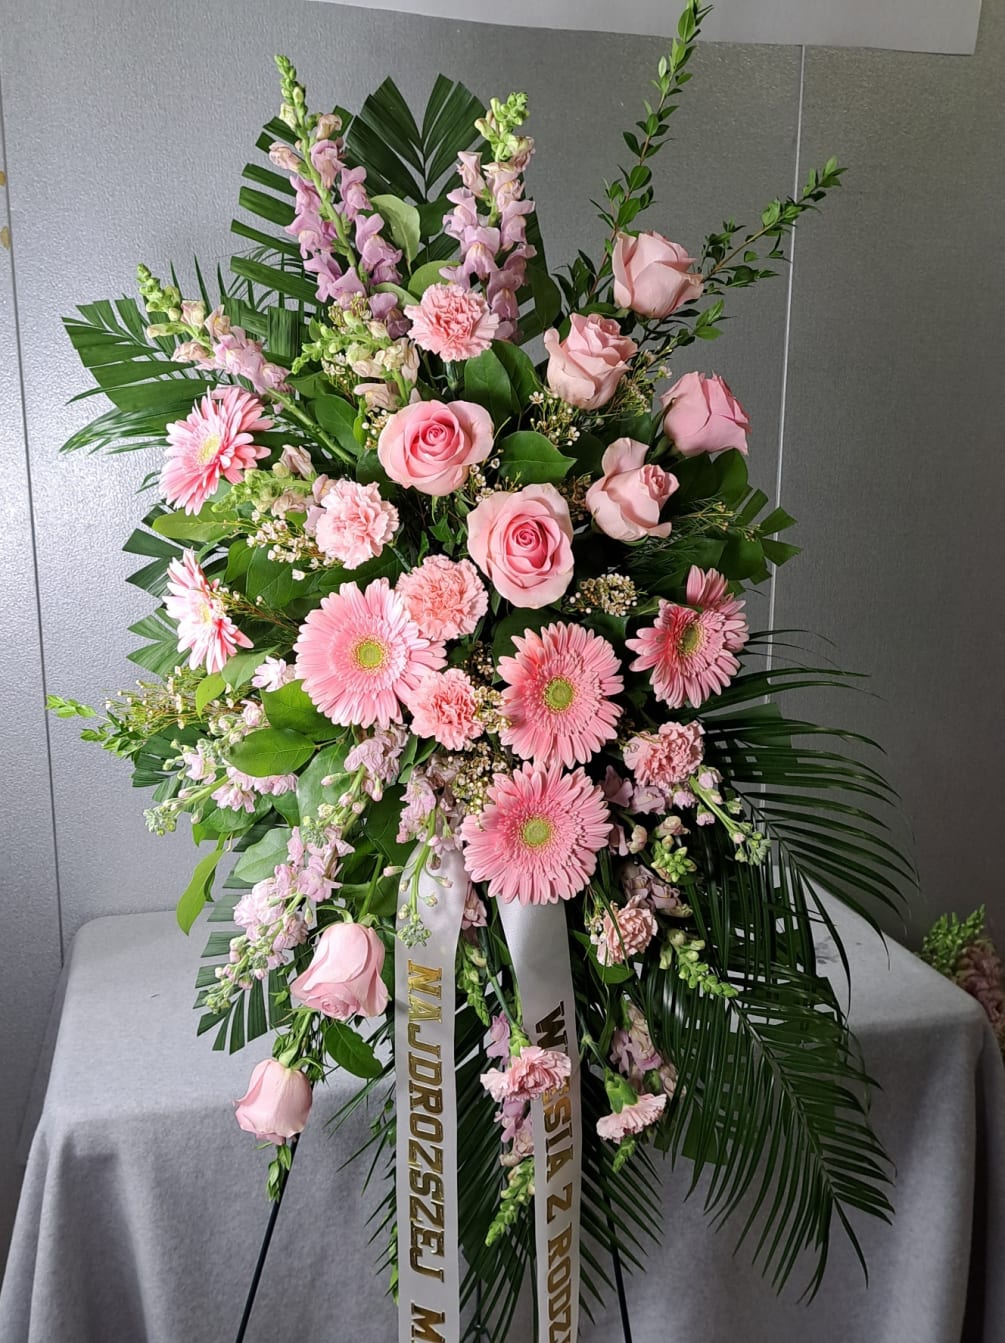 This traditional standing spray is arranged with pink gerbera daisies, roses, carnations